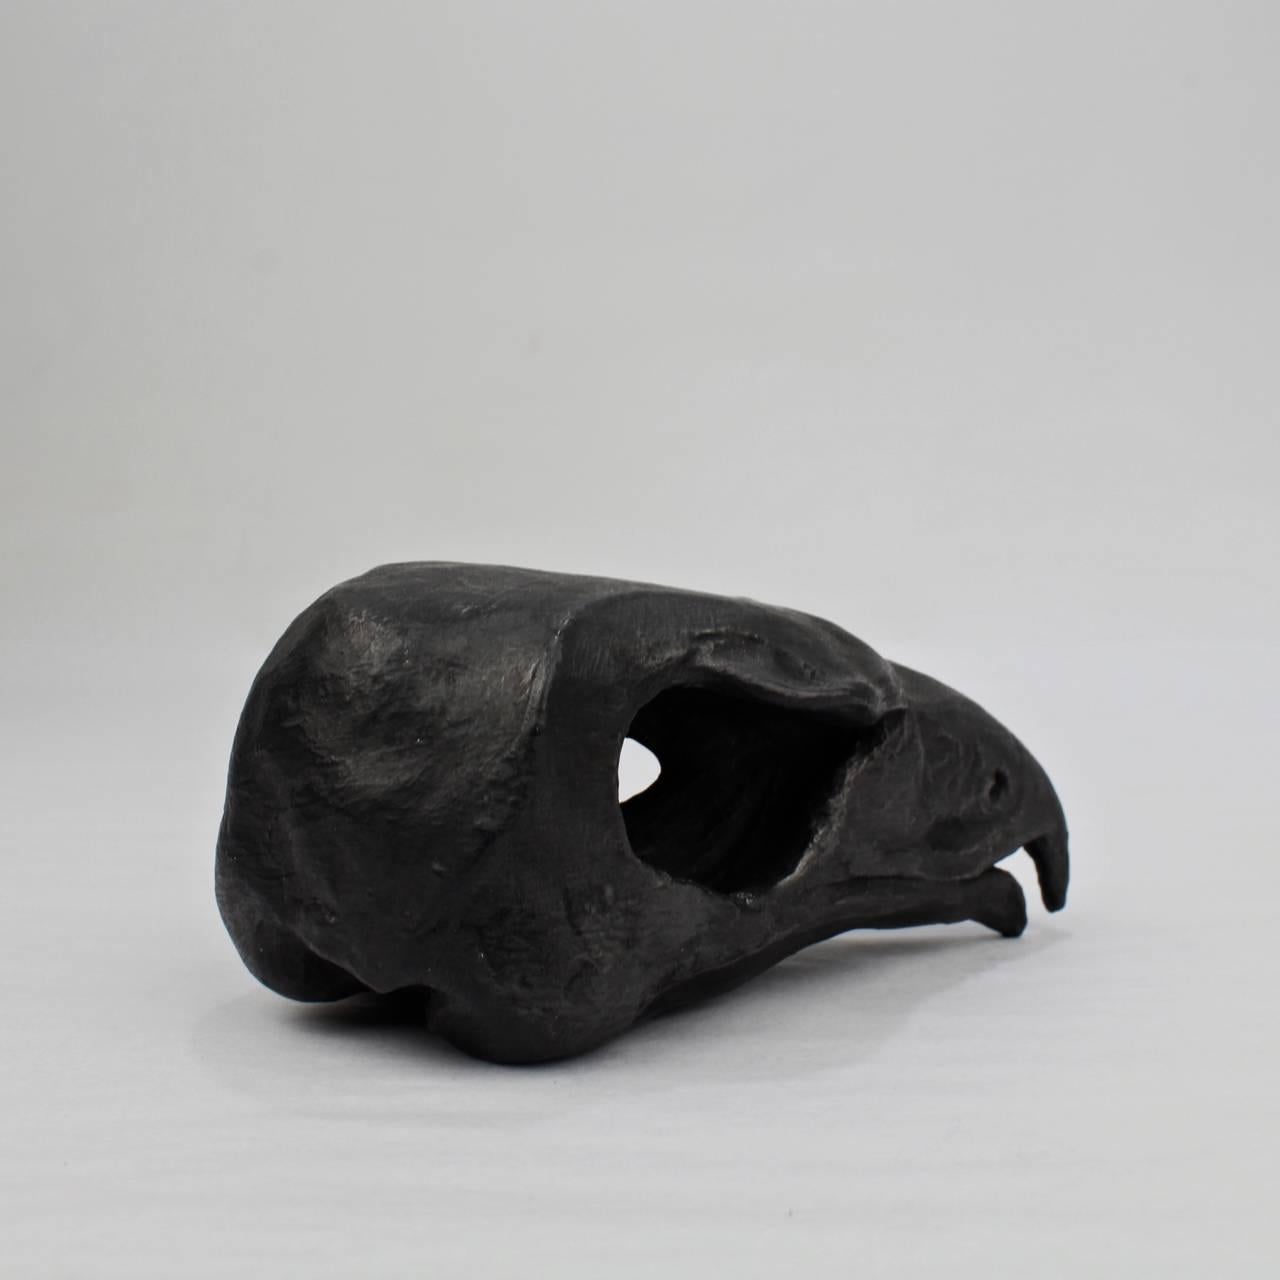 Modern Unique Black Painted Terracotta Sculpture of a Hawk Skull by Darla Jackson, 2016 For Sale